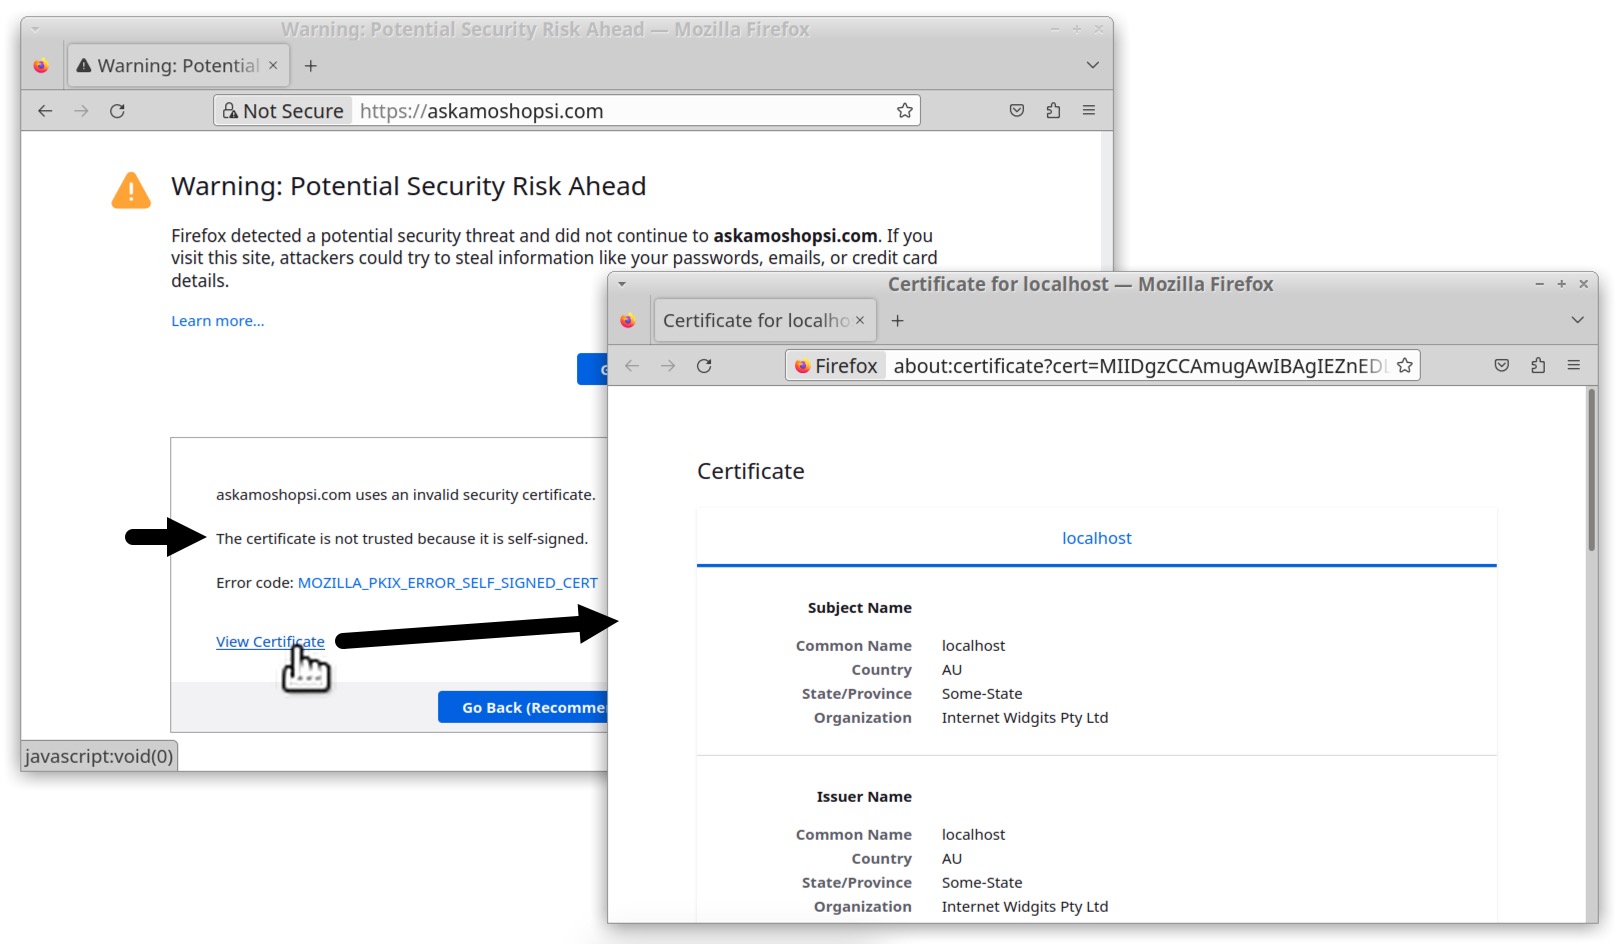 Image 12 is two screenshots of Mozilla Firefox windows, showing a warning for the potential security risk of the invalid certificate. It also shows the certificate for the localhost.